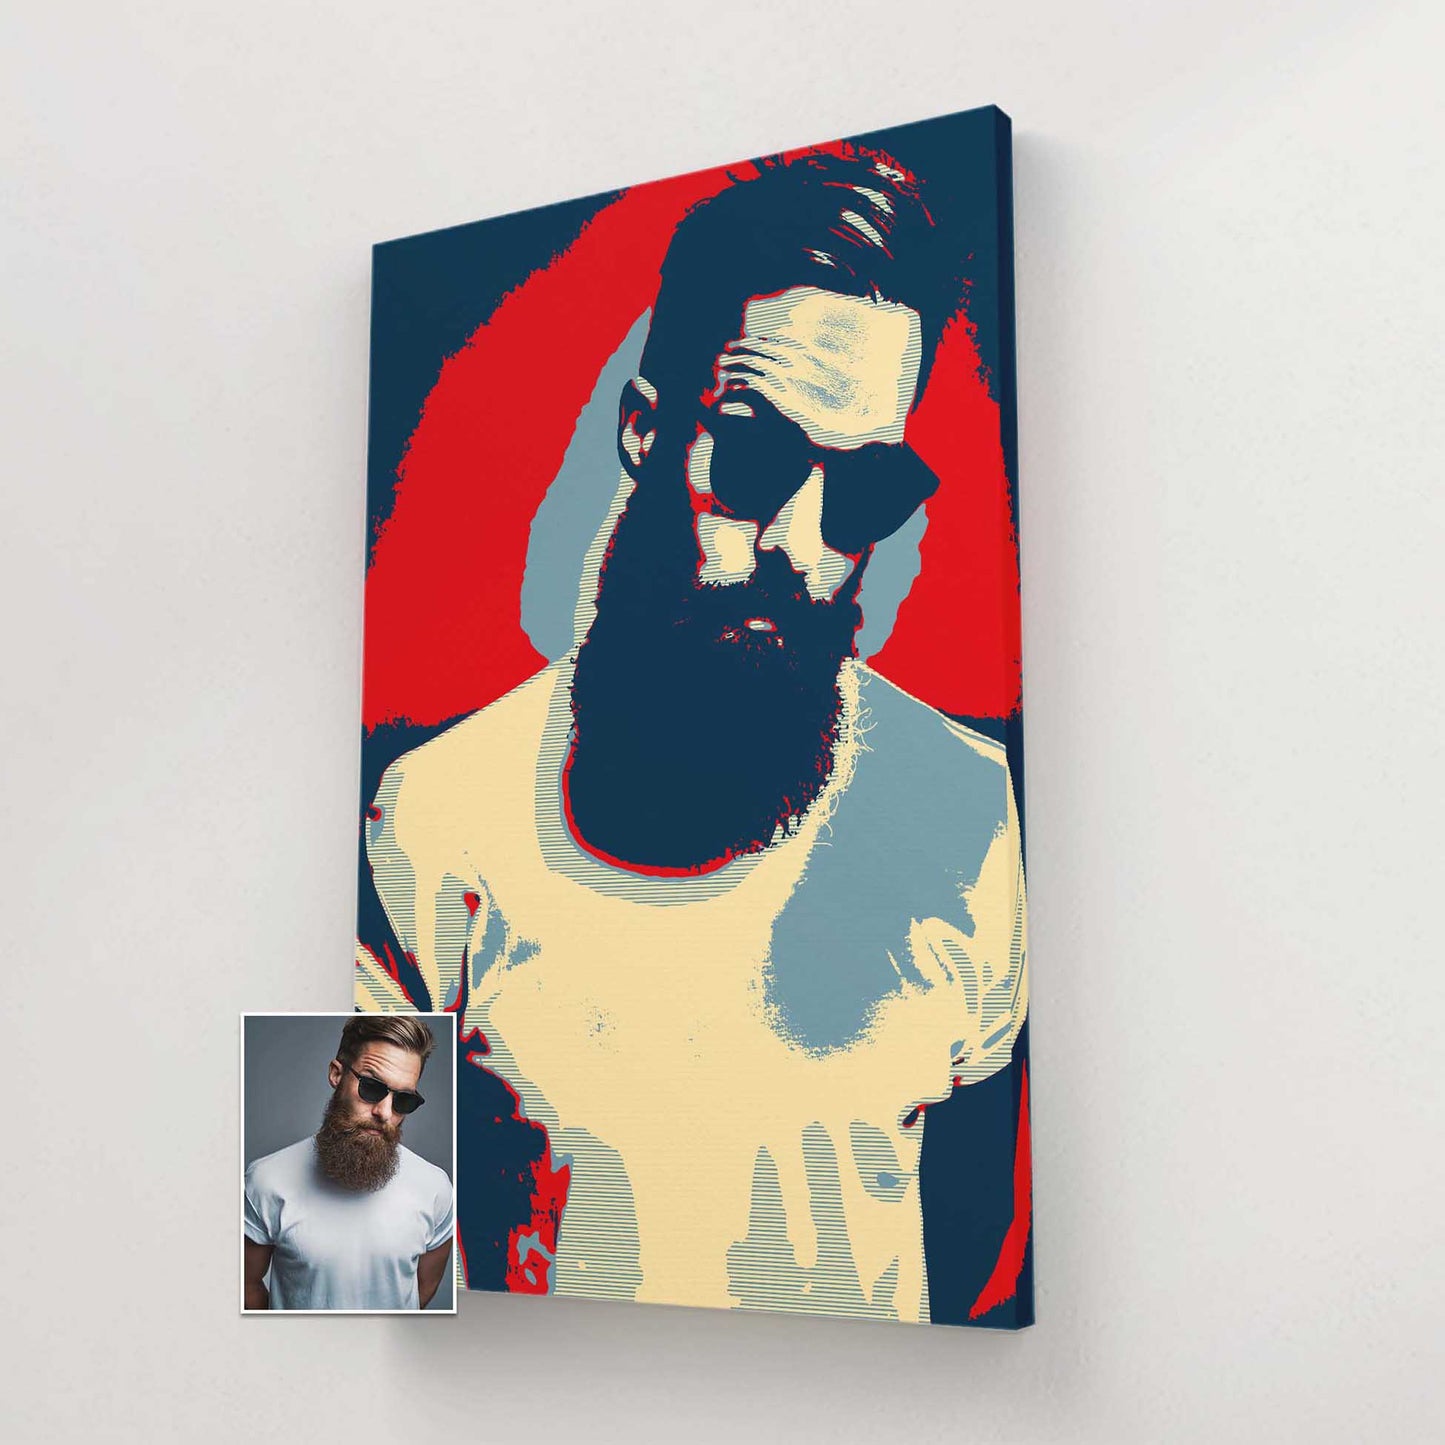 Elevate your space with a Personalised Election Poster Canvas. This captivating pop art creation, derived from your photo, is printed on handmade canvas. Its unique and original design brings a sense of novelty and digital art flair